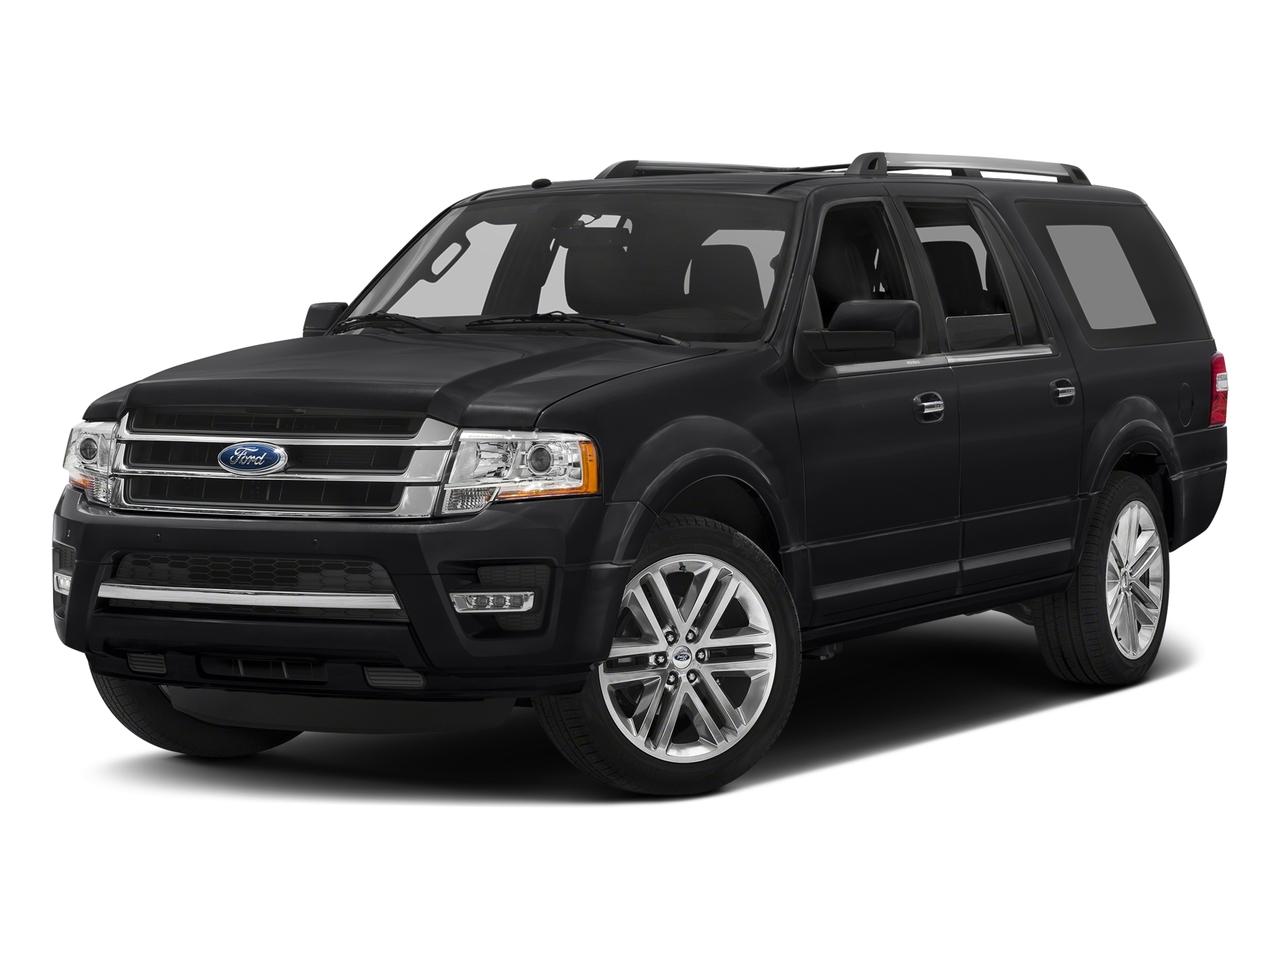 2016 Ford Expedition EL Vehicle Photo in BATON ROUGE, LA 70806-4466